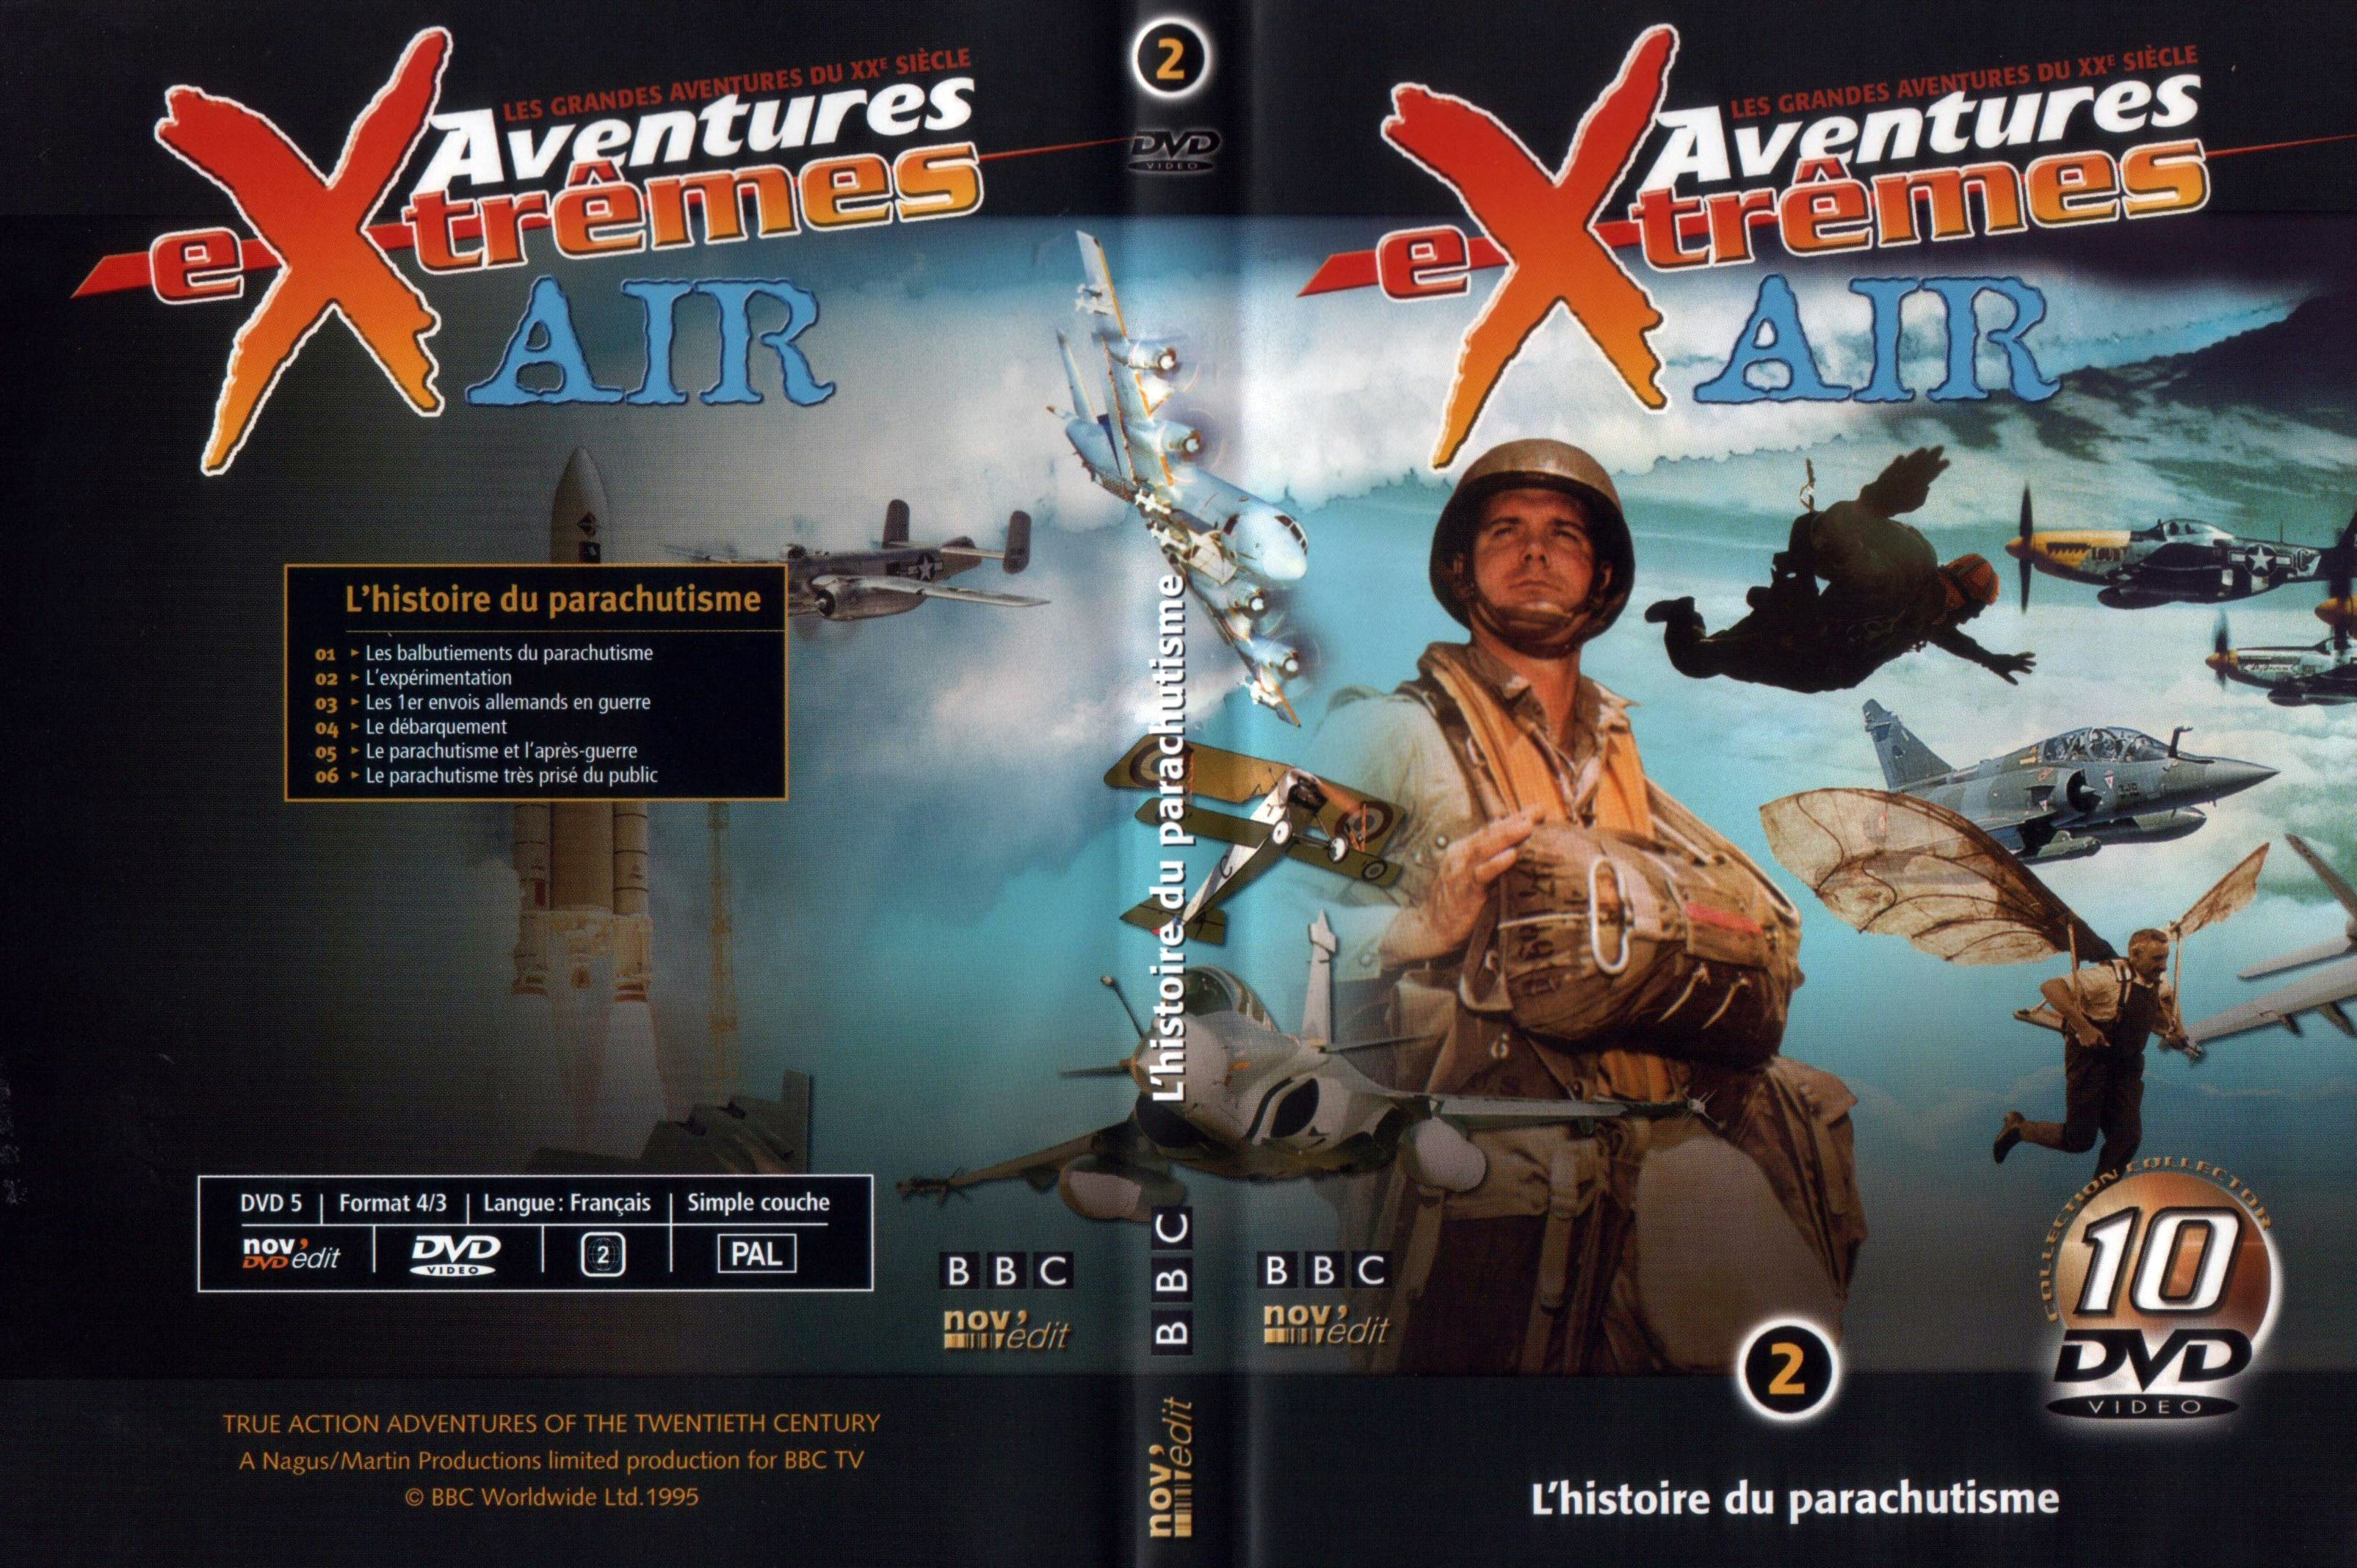 Jaquette DVD Aventures extremes air vol 2 l